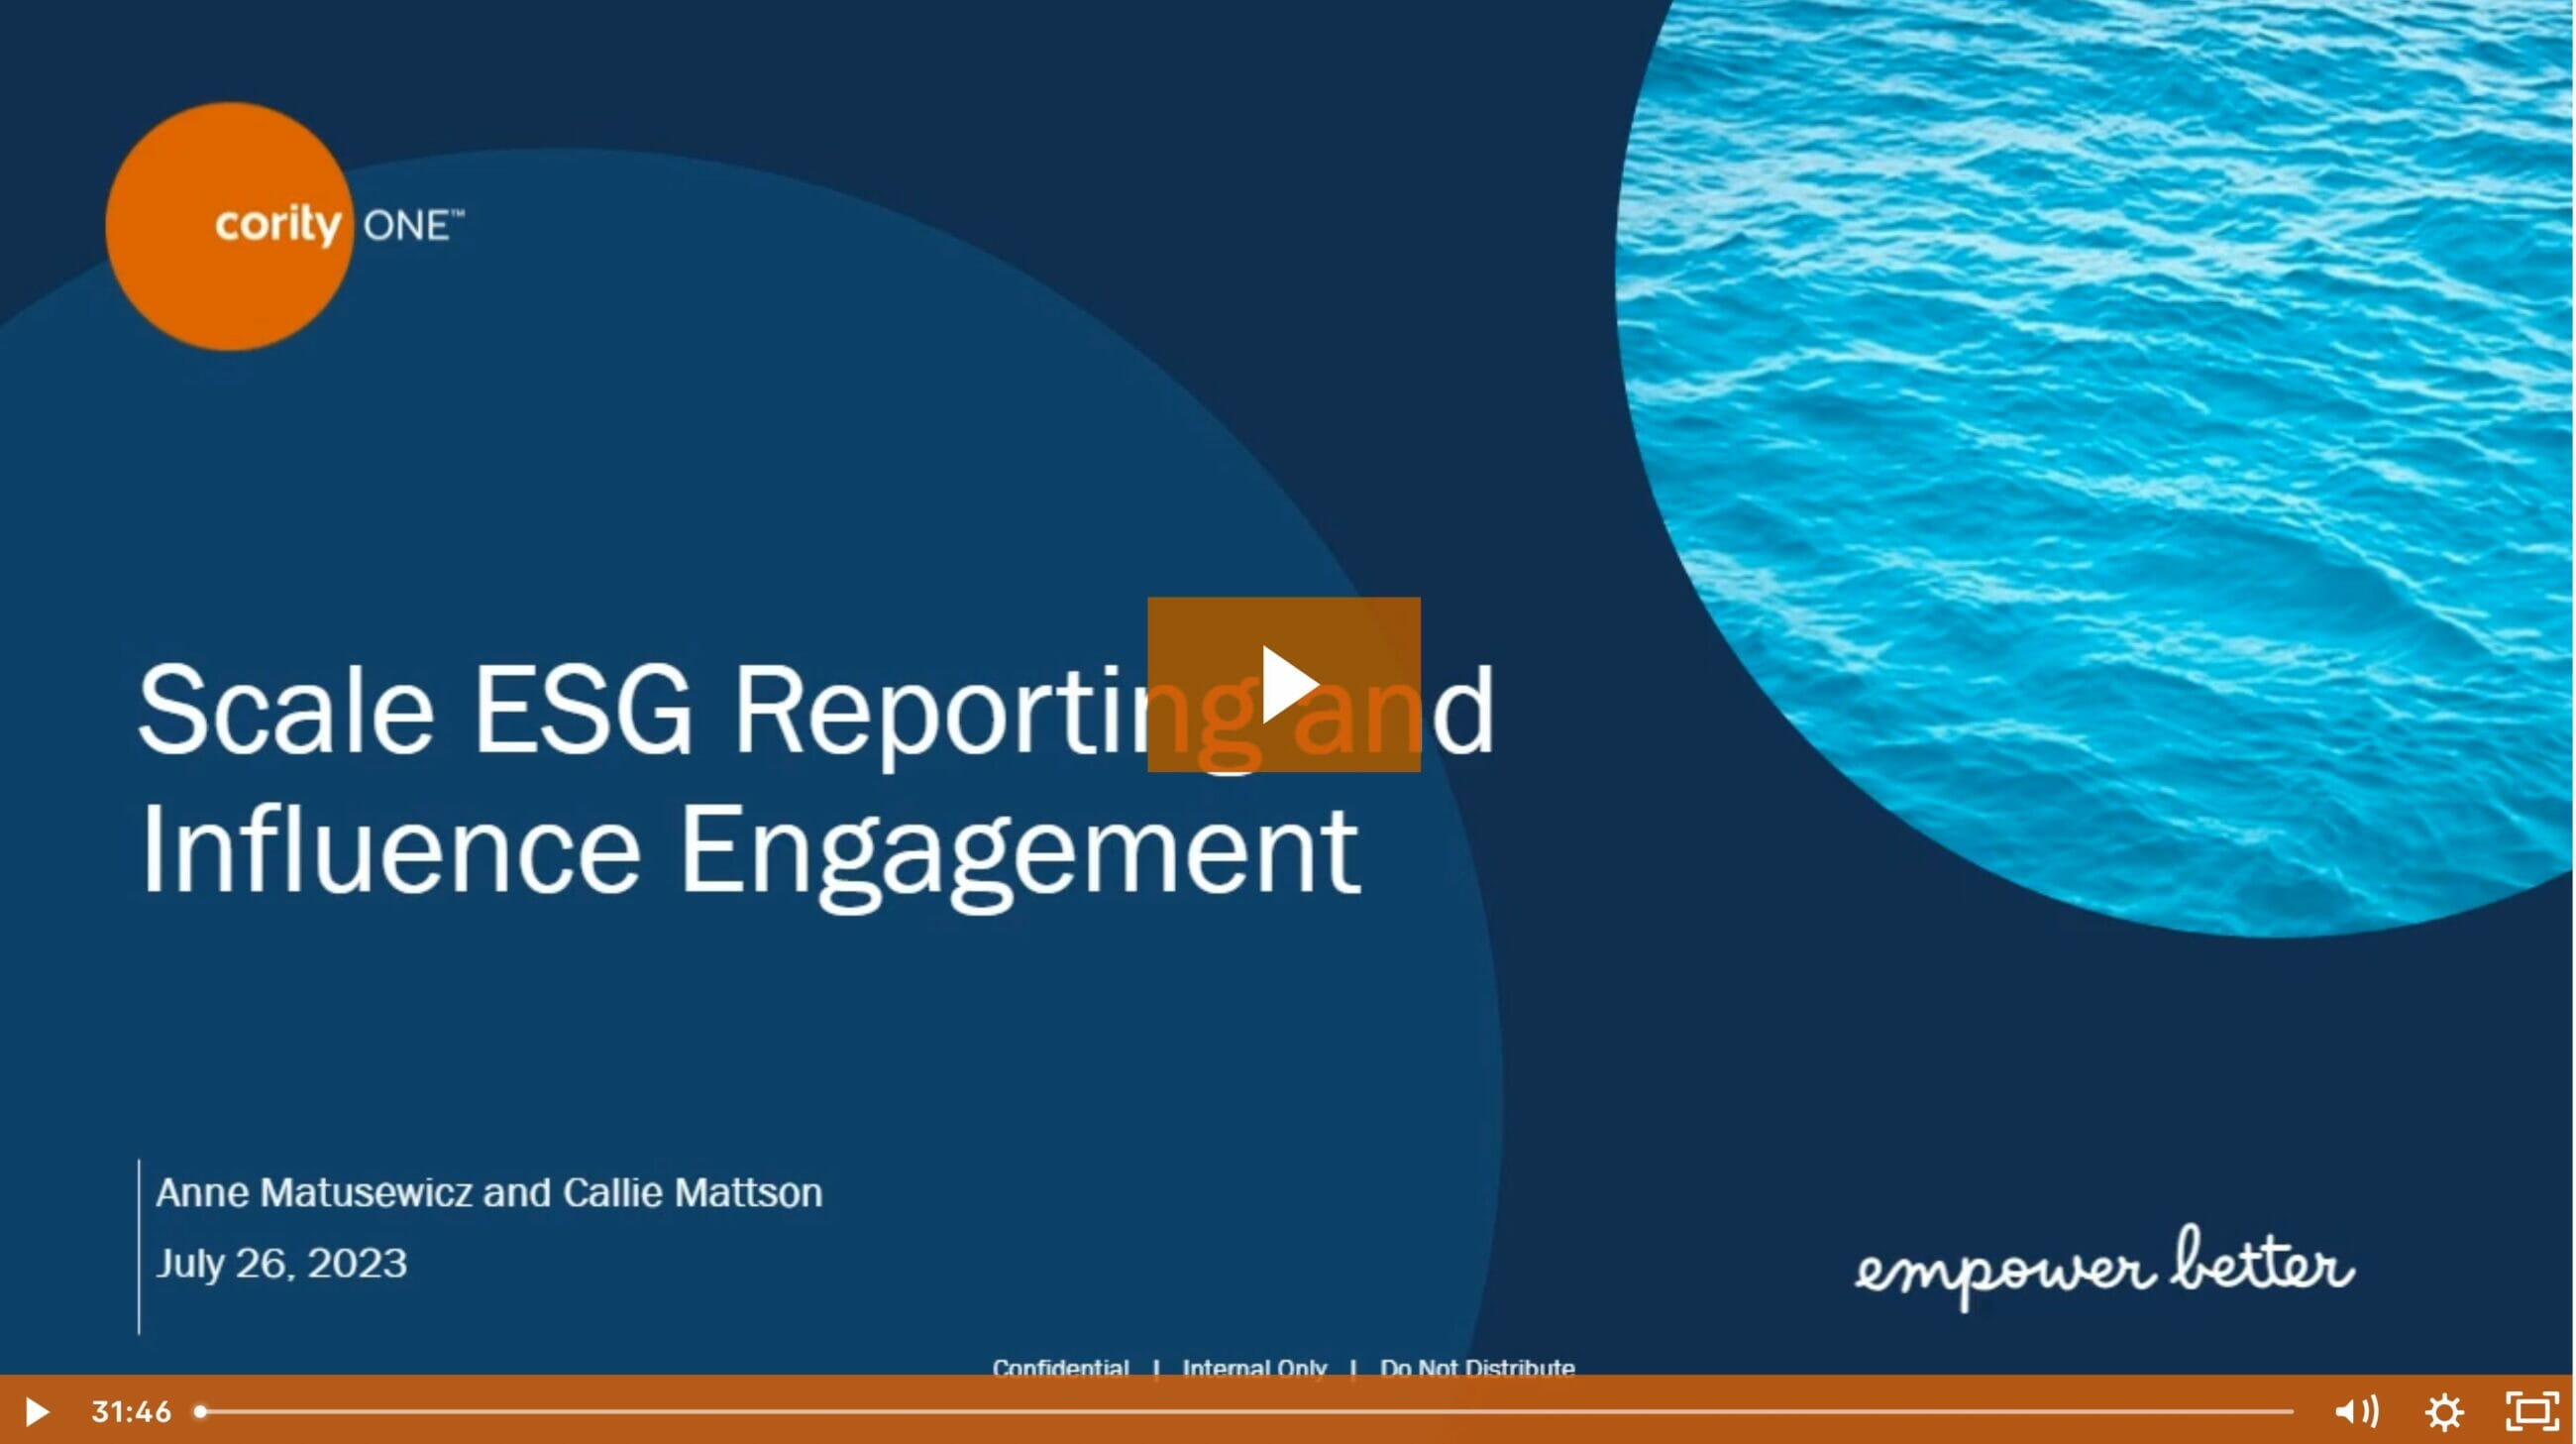 Implementing ESG software to scale reporting and influence engagement